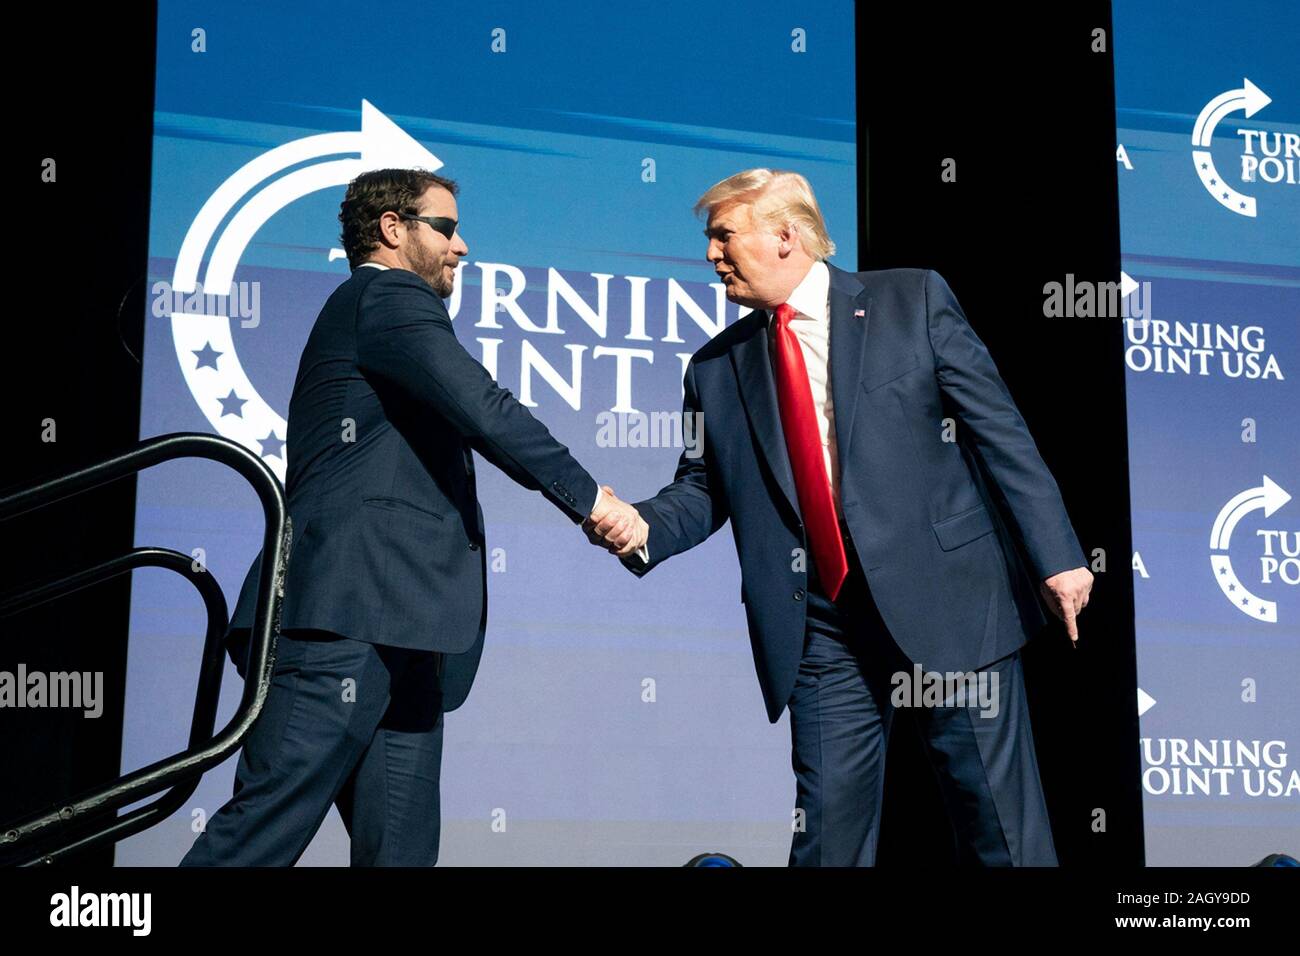 U.S President Donald Trump shakes hands with Texas Congressman Dan Crenshaw, at the Turning Point USA 5th annual Student Action Summit at the Palm Beach County Convention Center December 21, 2019 in West Palm Beach, Florida. Trump rallied the youth conservative group with wild claims on wind turbines and attacks on his opponents. Stock Photo